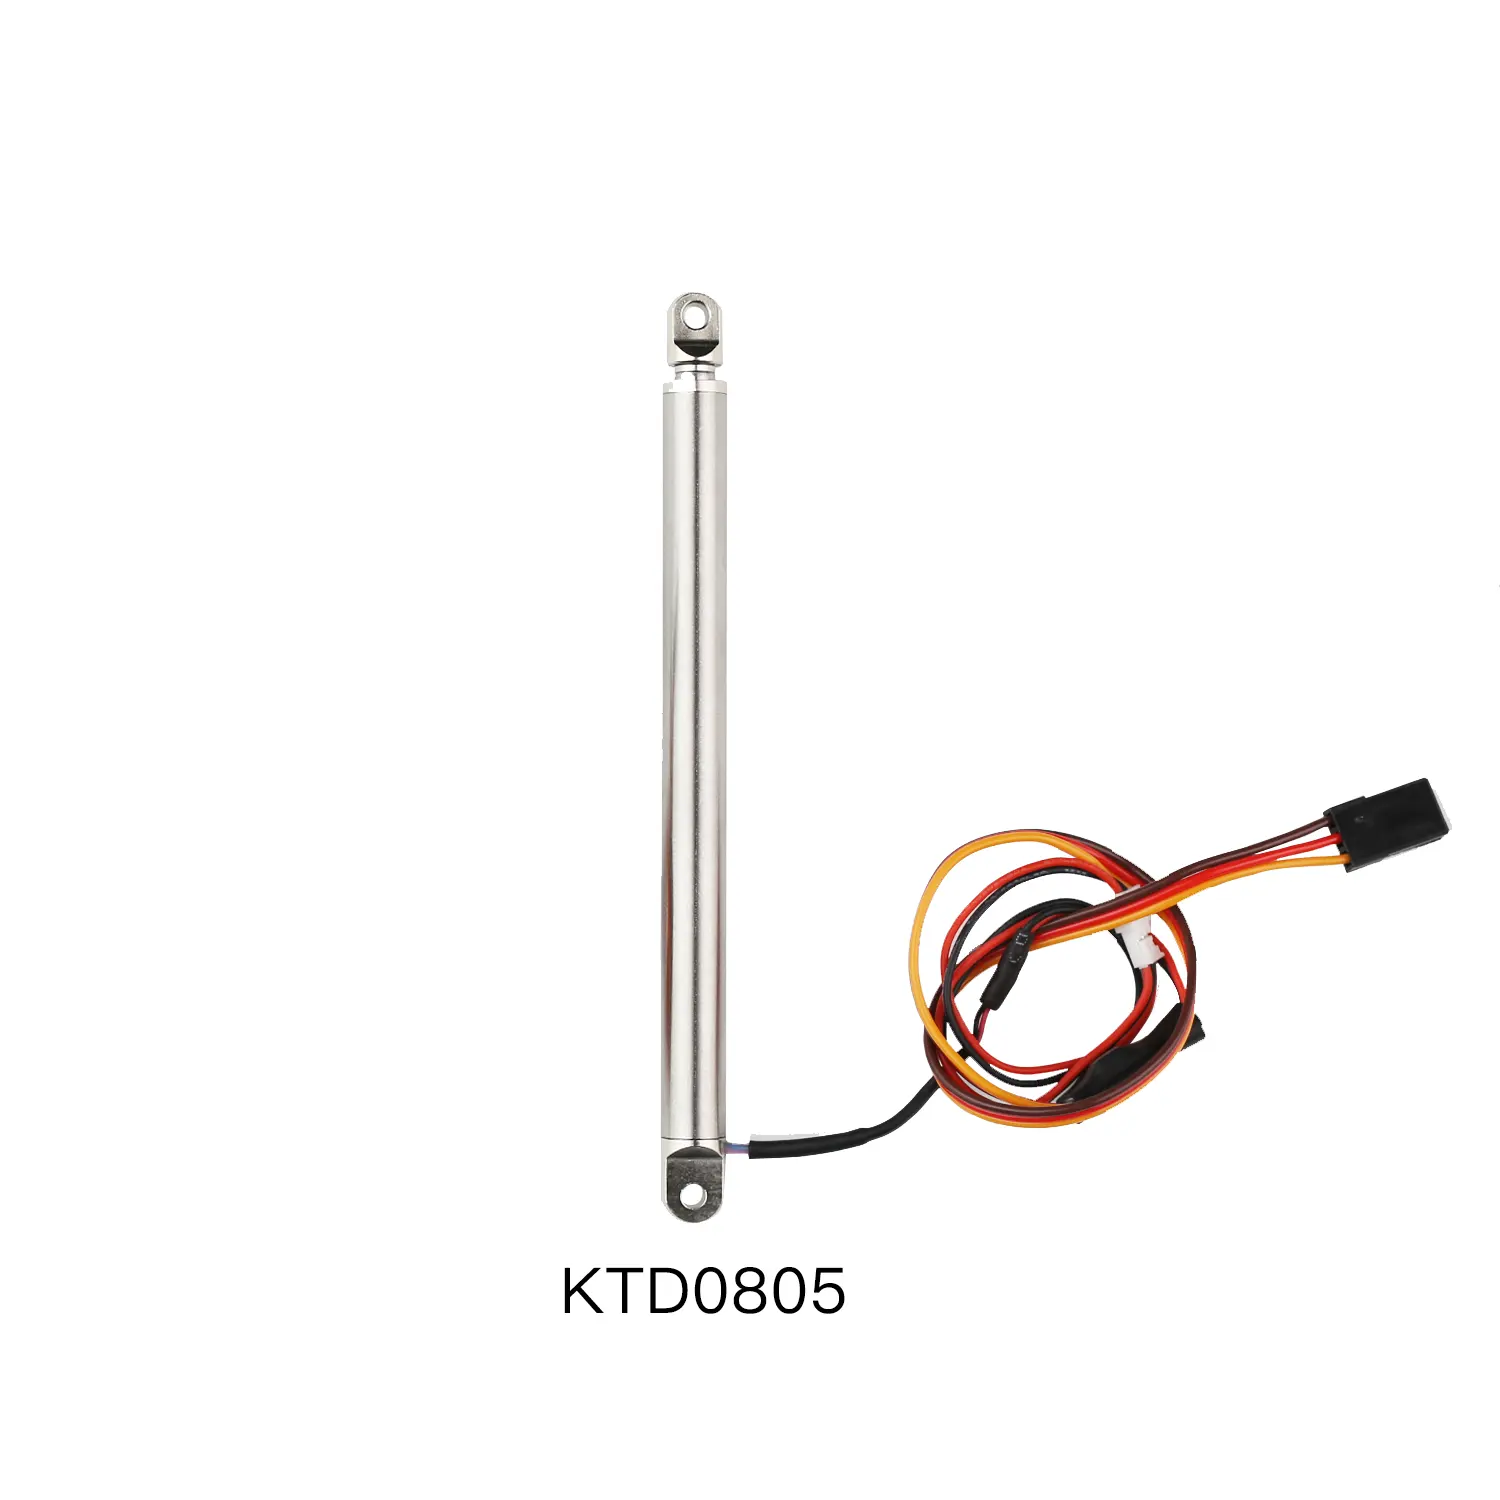 Fast Speed Dc 6v Mini Electric Actuator Industrial Telescopic IP65 Linear Electric Actuator Waterproof For Hospital bed lift